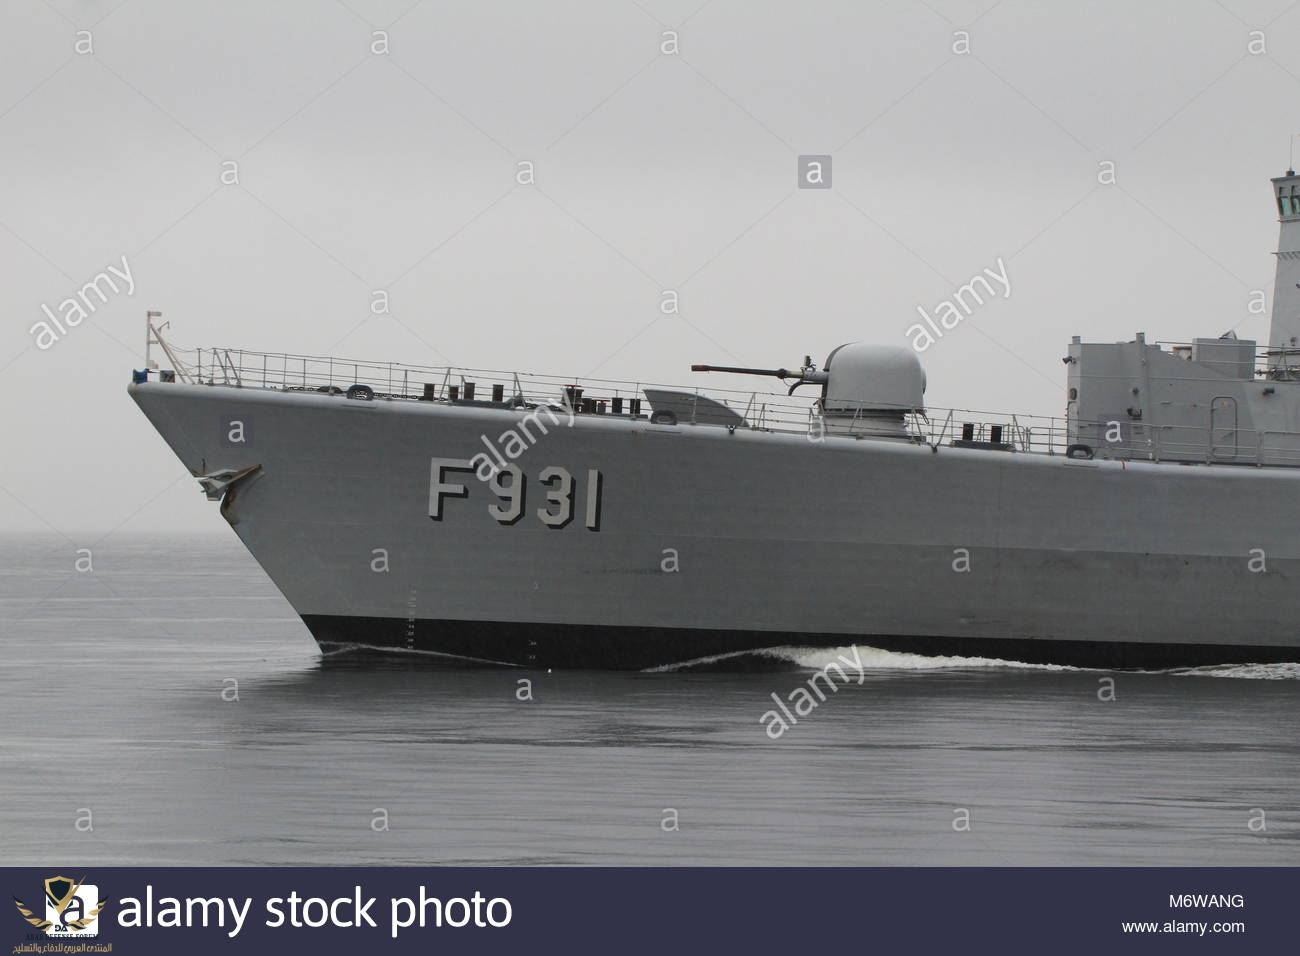 the-prow-of-bns-louise-marie-f931-a-karel-doorman-class-frigate-operated-M6WANG-1.jpg